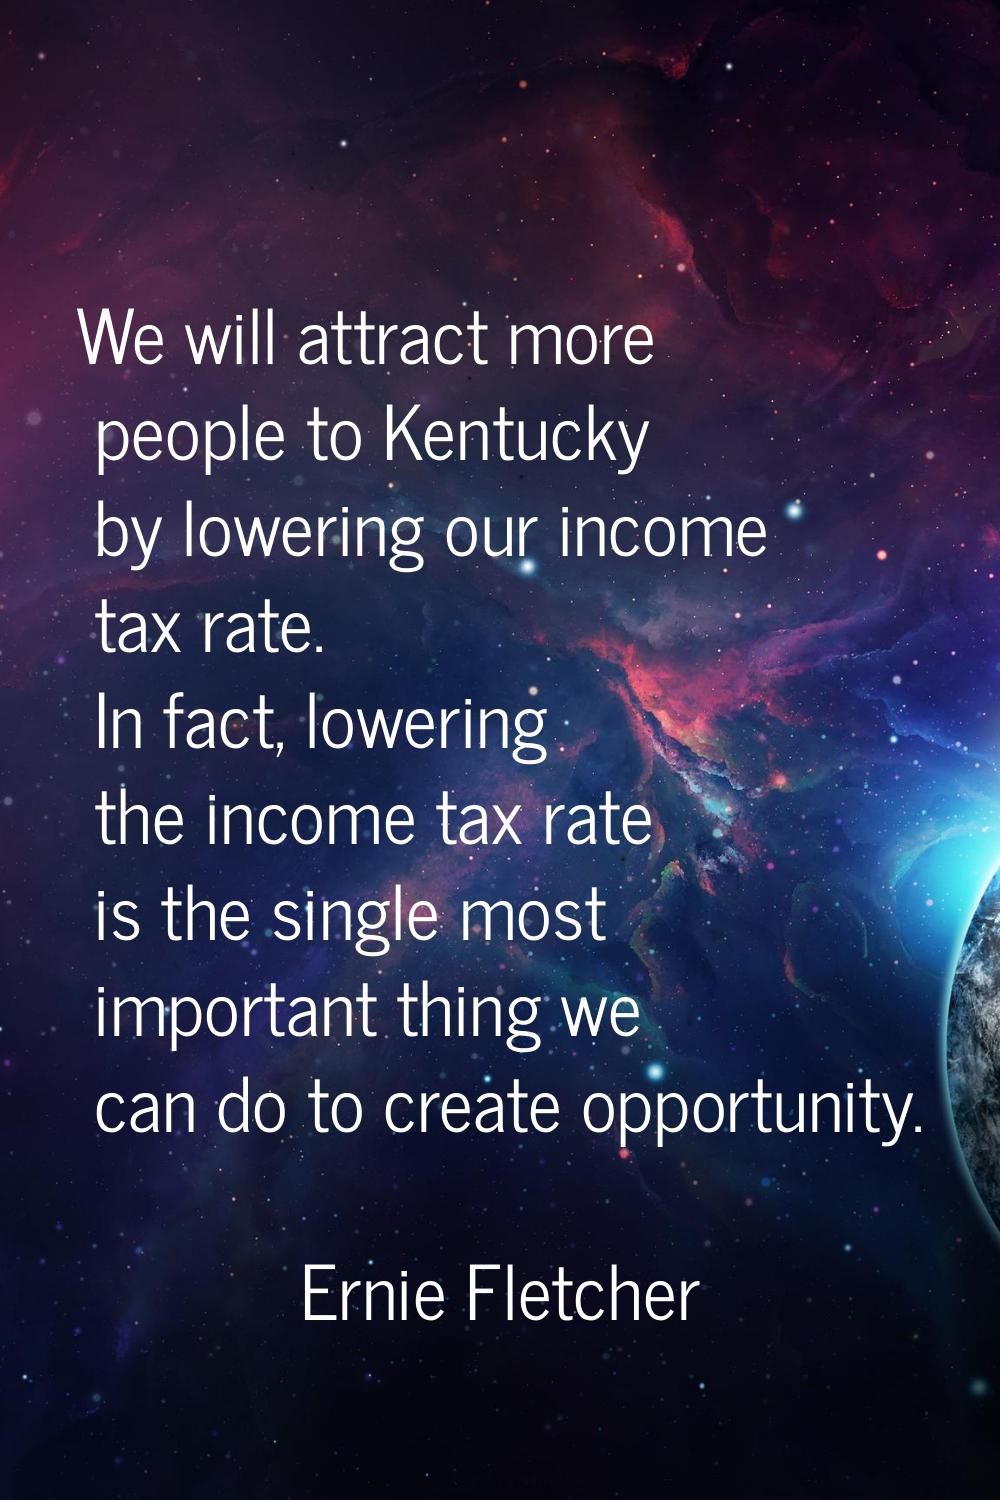 We will attract more people to Kentucky by lowering our income tax rate. In fact, lowering the inco